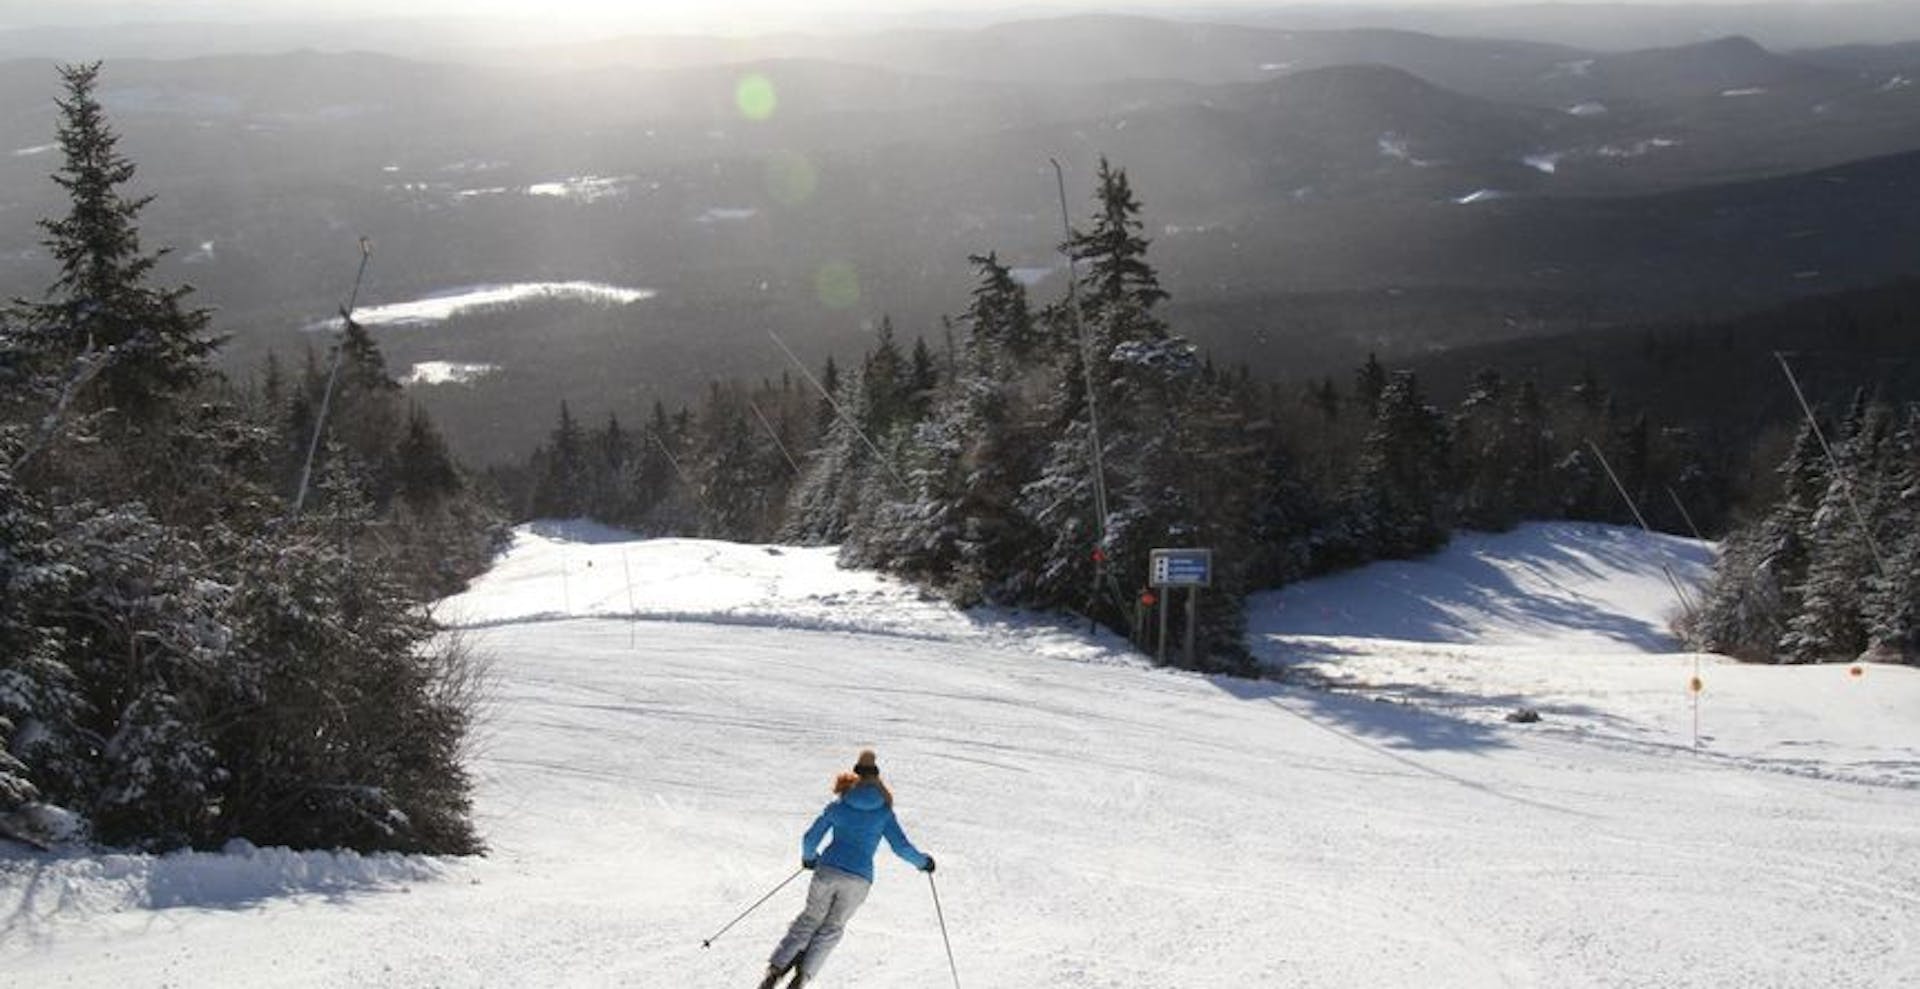 Okemo serves up a range of terrain to suit all abilities | Photo Copyright: Greg Burke